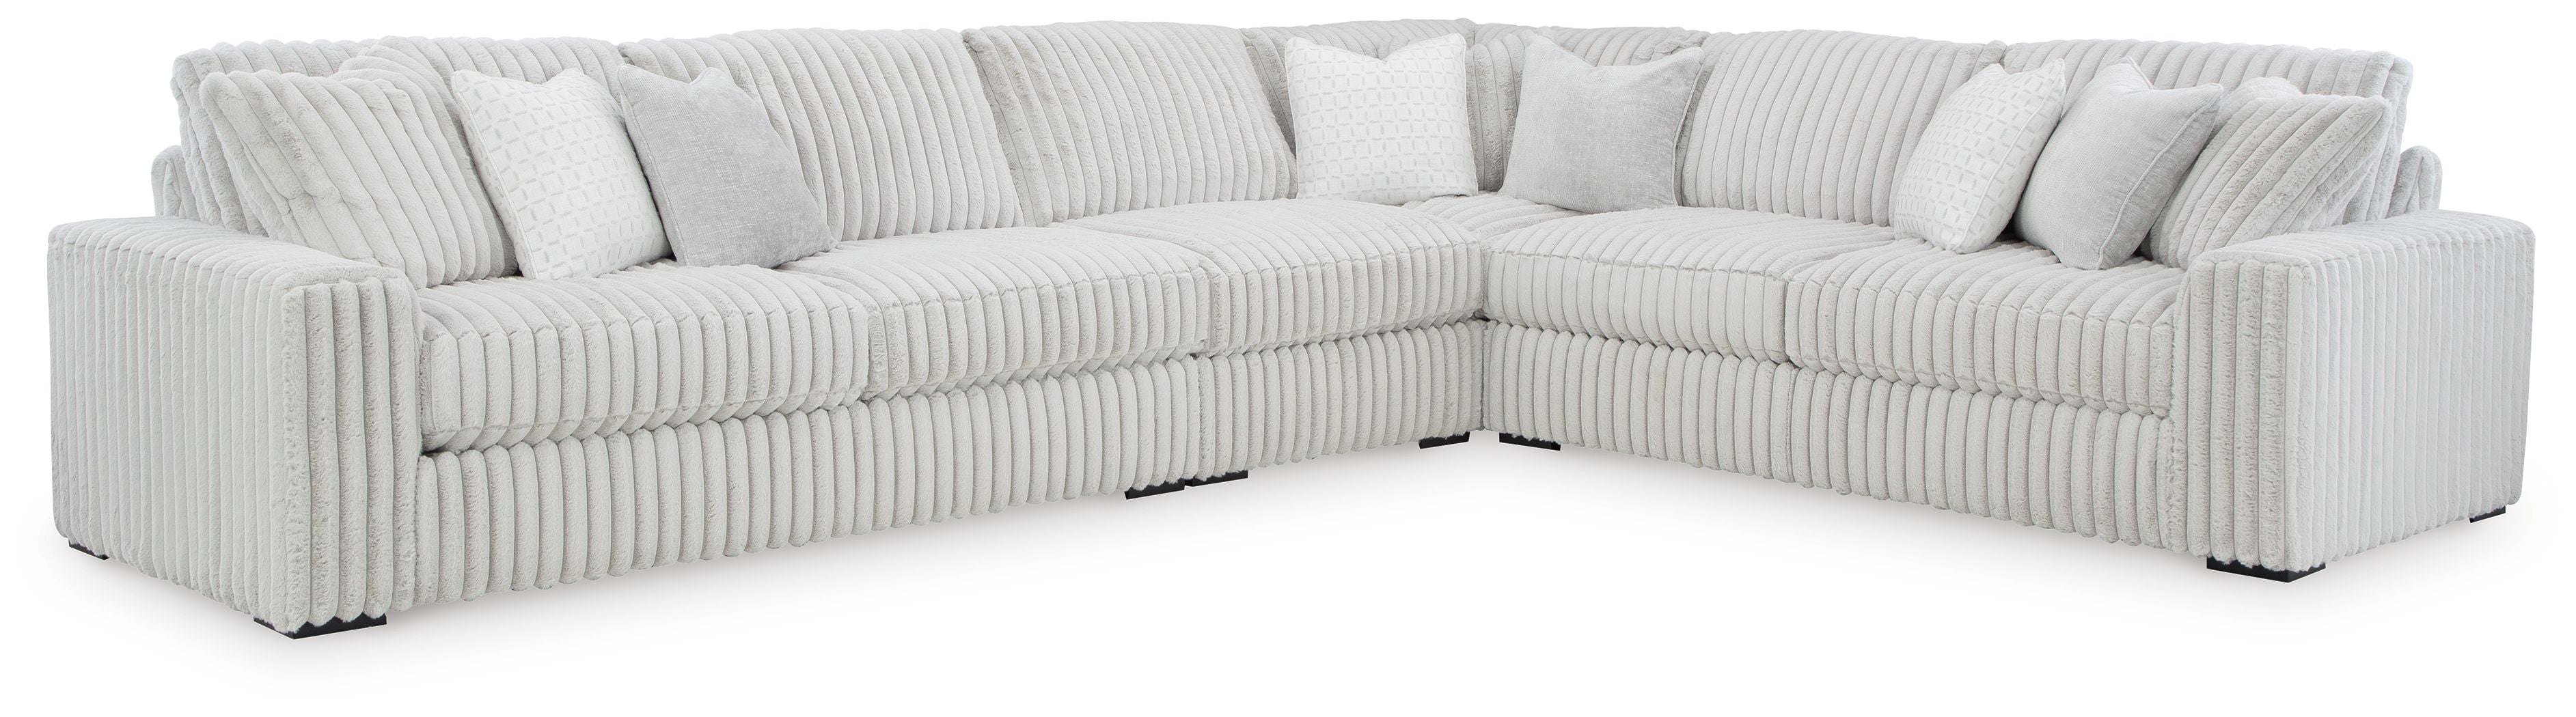 stupendous white l shaped sectional